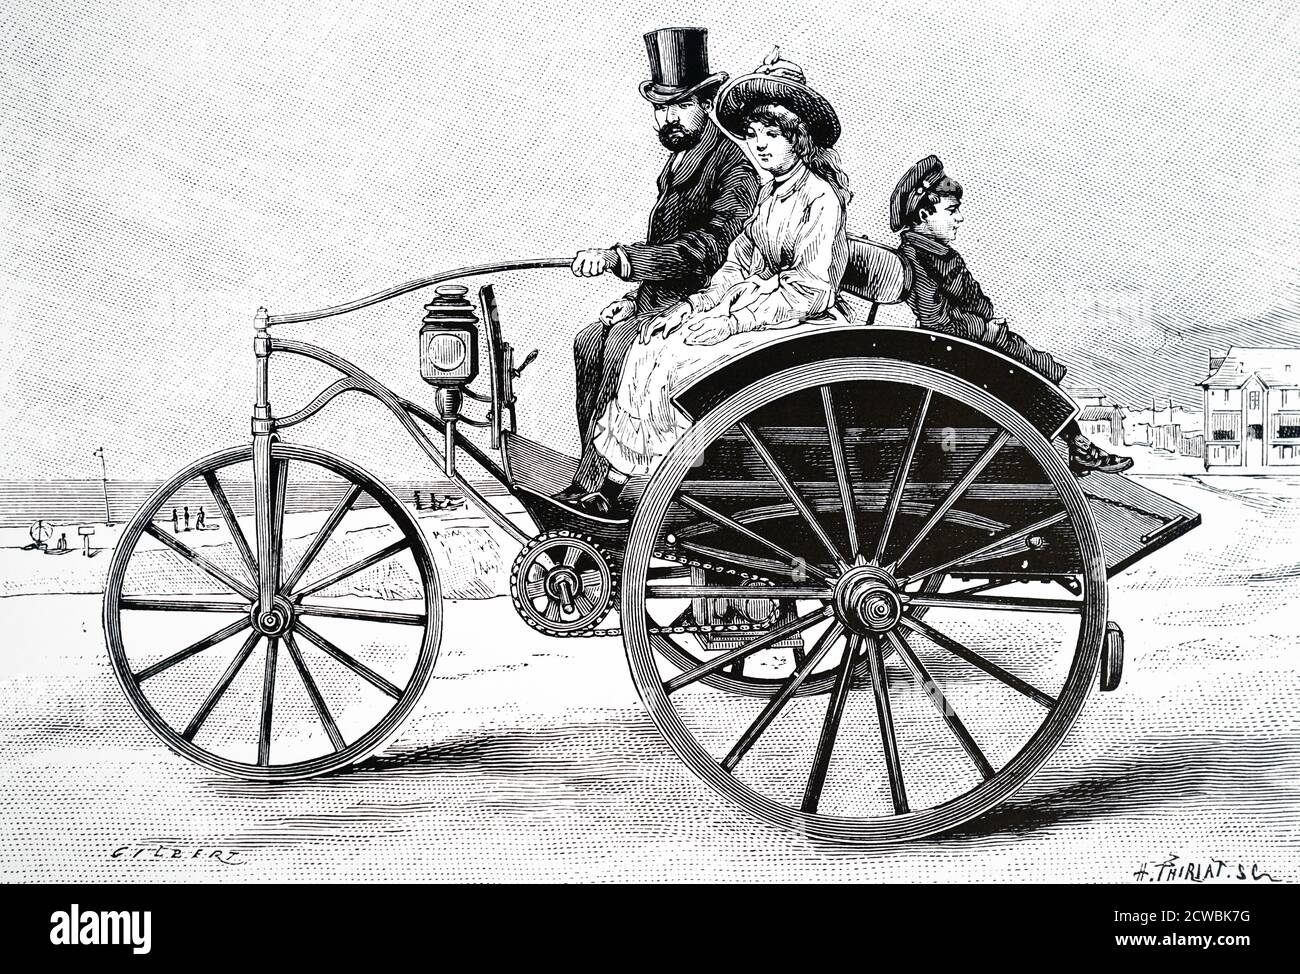 Engraving depicting Magnus Volk's electric dog-cart. The vehicle was powered by battery and could run for six hours without recharging and was capable of a speed of 9 mph on a good surface with two passengers. Stock Photo